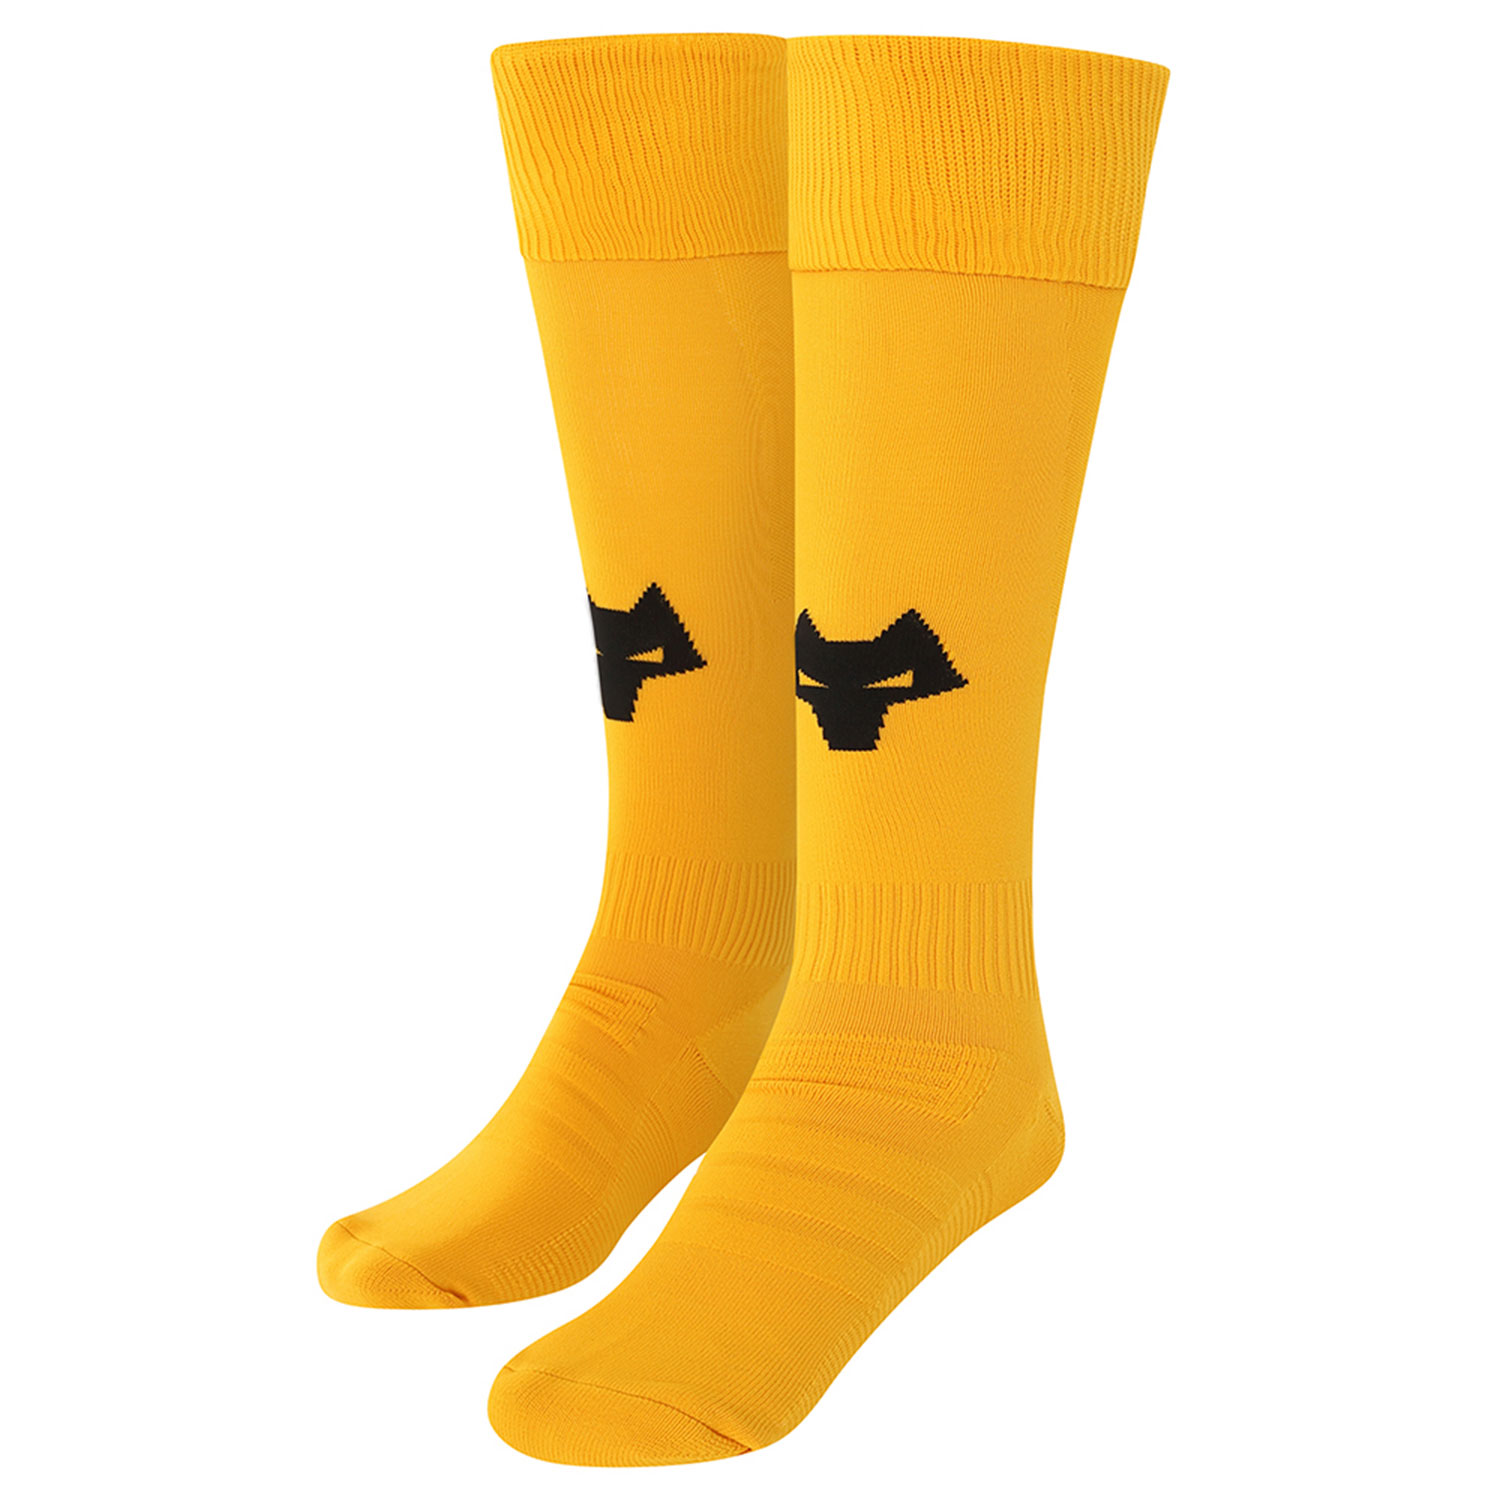 2022-23 Wolves Home Socks - Junior
Featuring a Wolves head incorporated into front and centre of the sock, to show prominently on and off field.

Polyamide 98%
Elastane 2%
